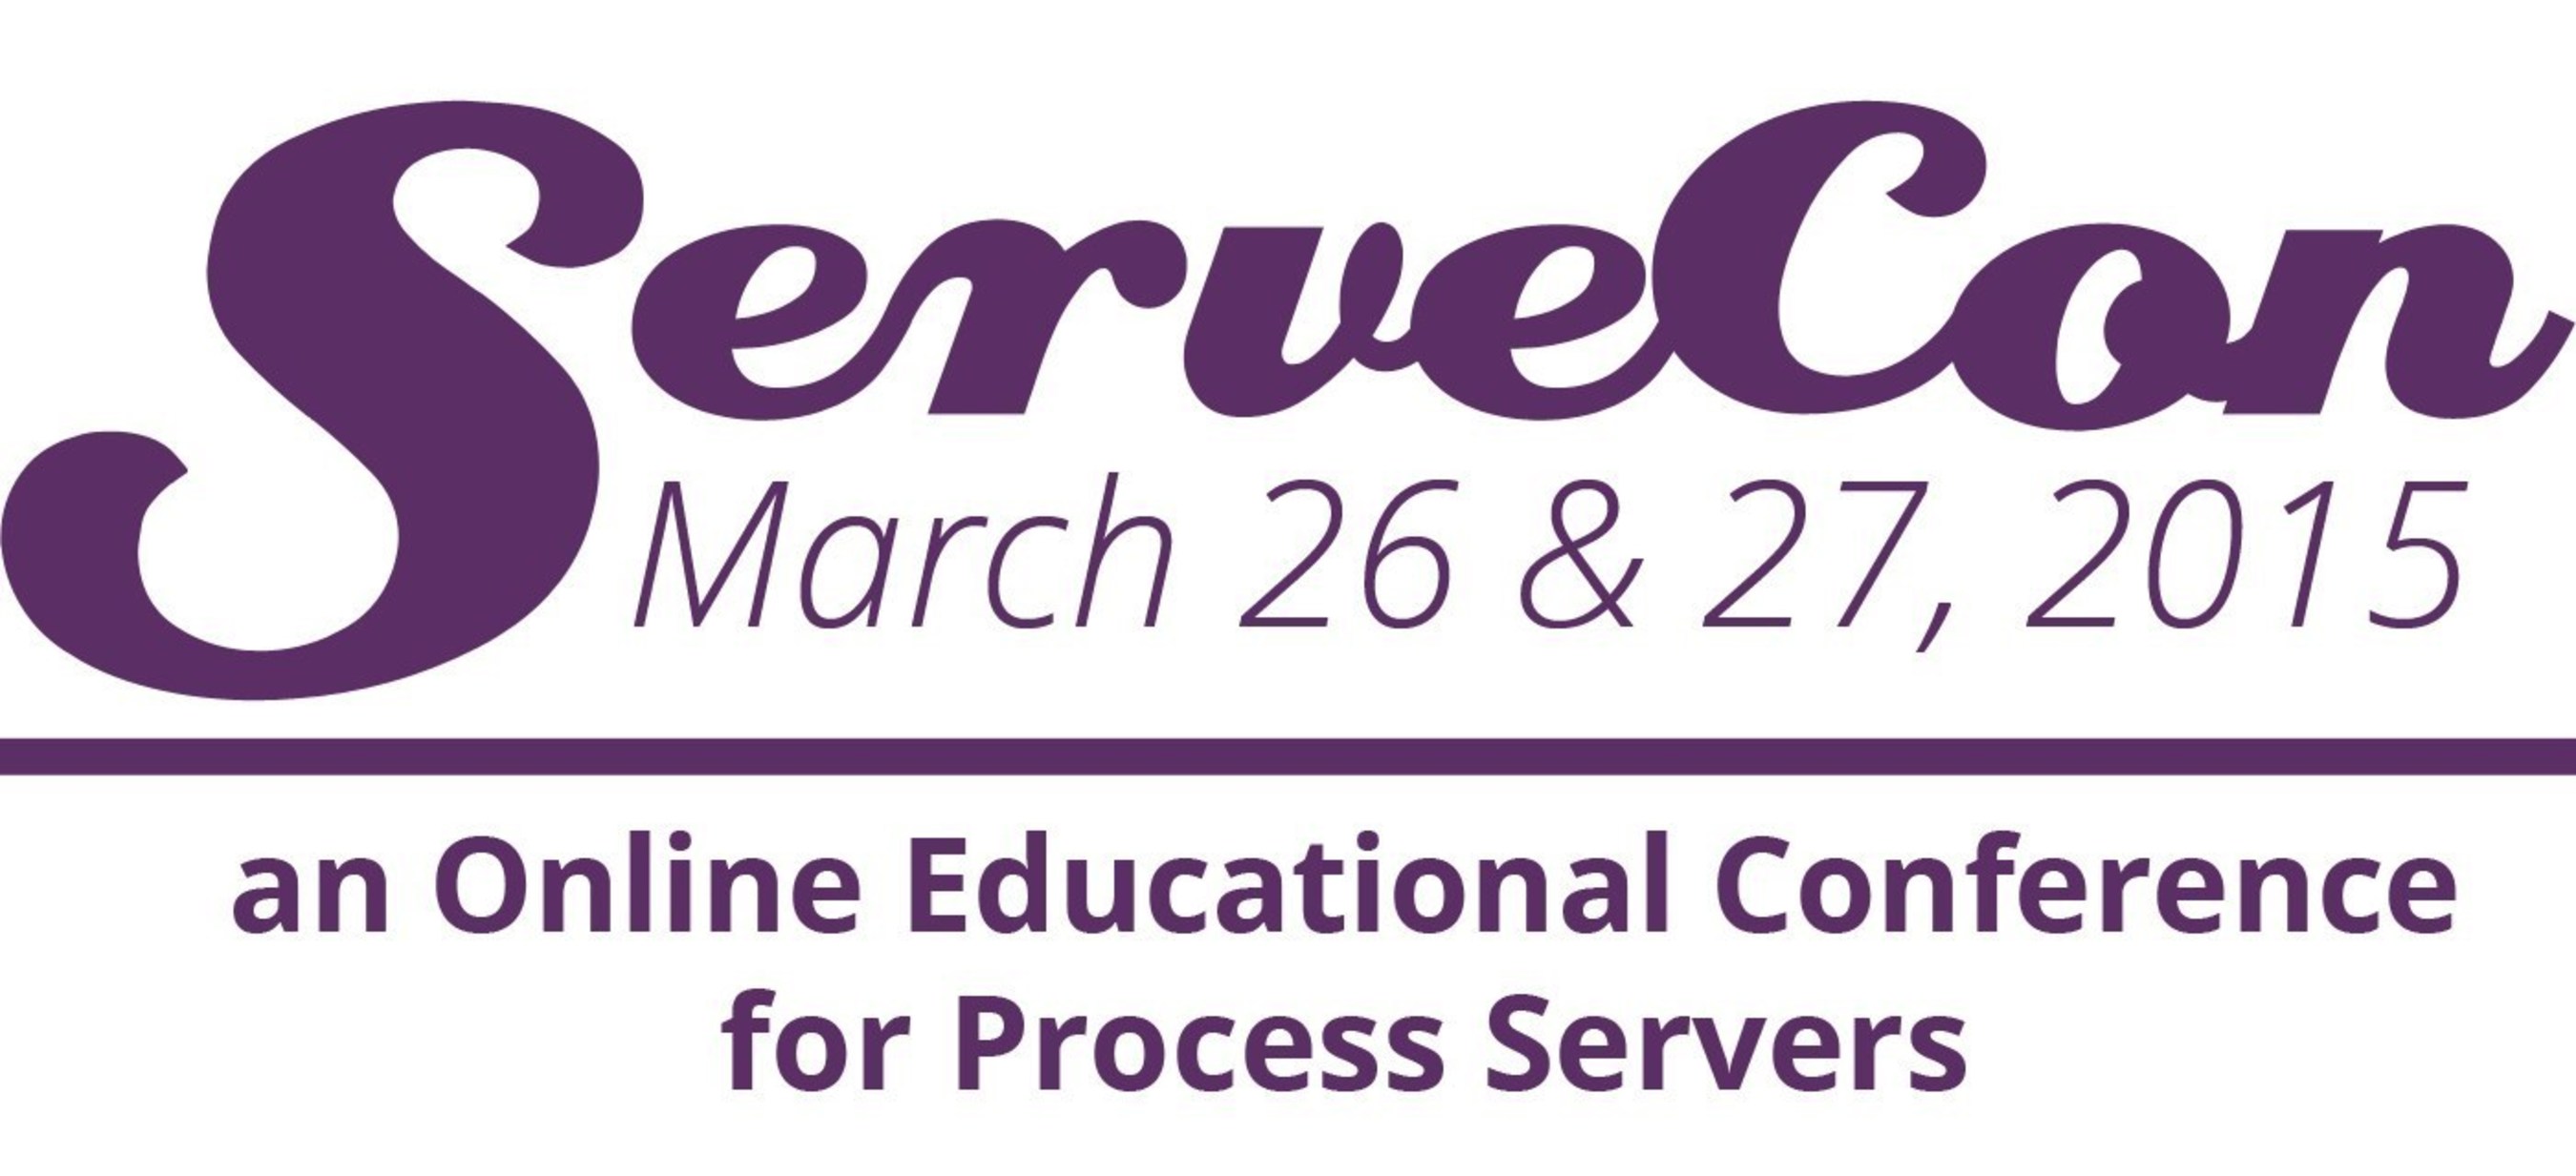 ServeCon is the online educational conference for process servers. Register at www.servecon.com